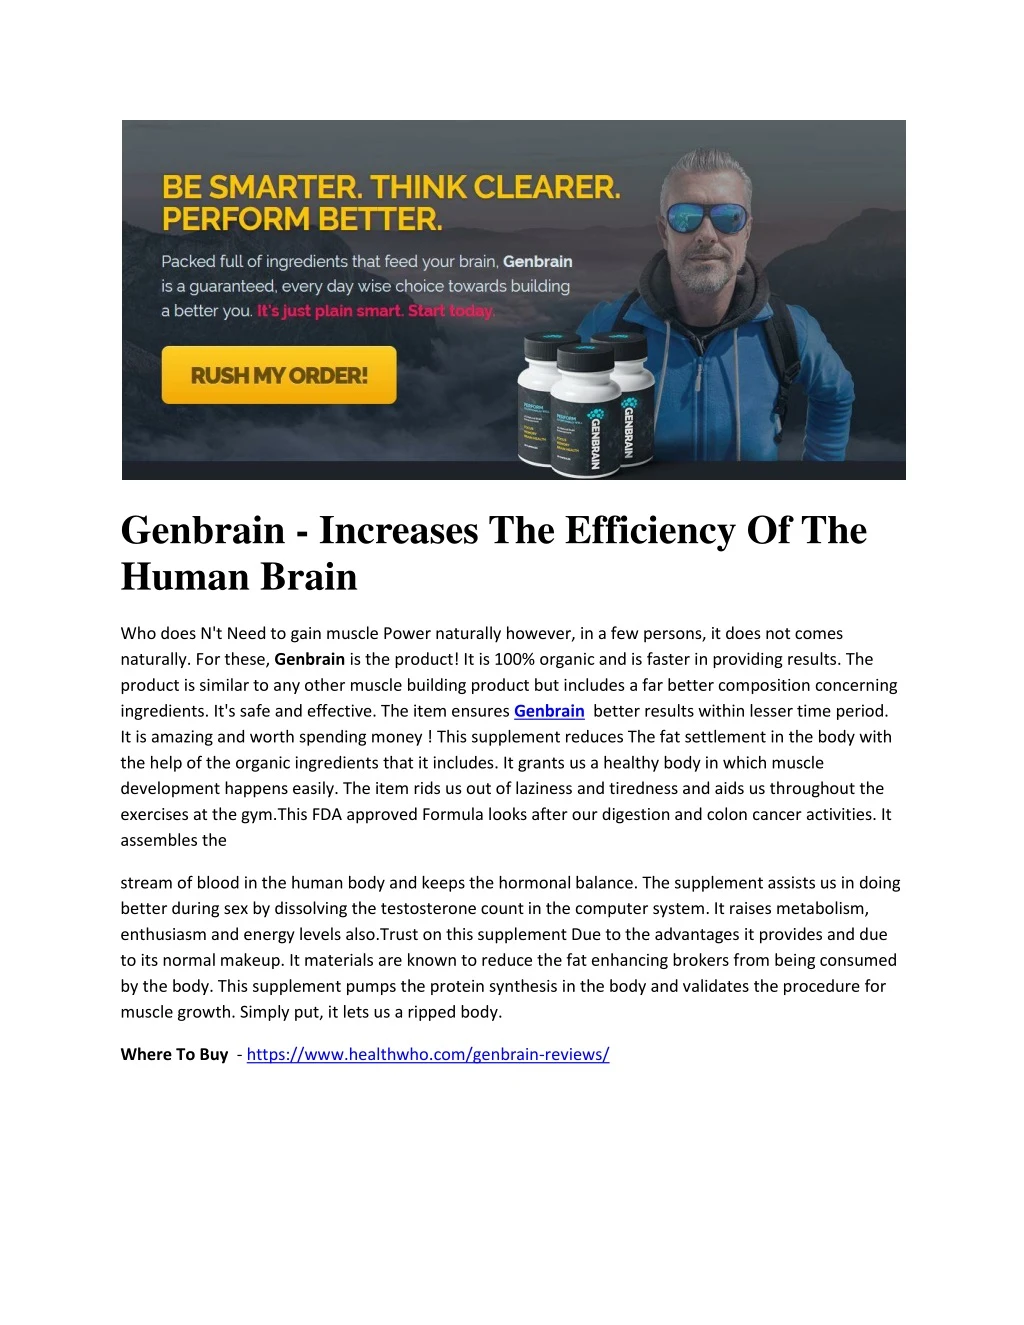 genbrain increases the efficiency of the human